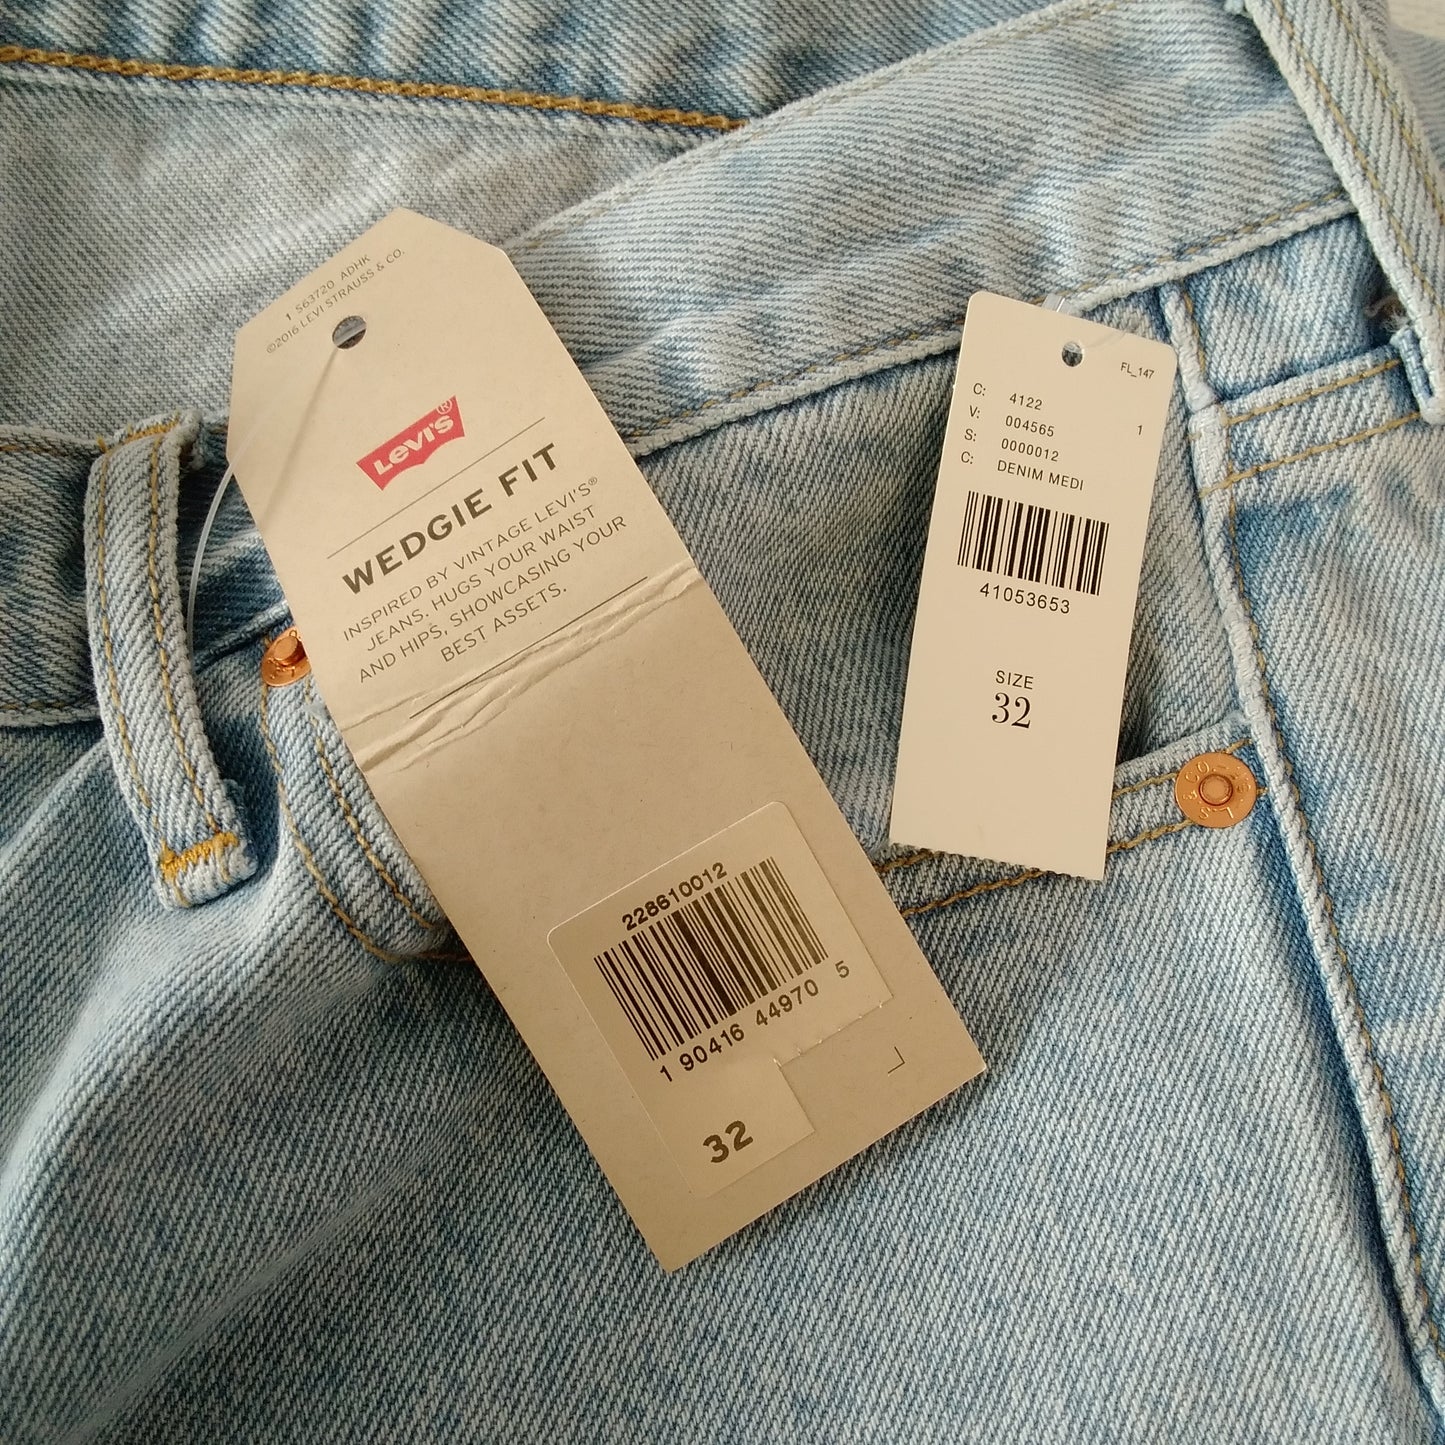 NWT - Levi's Wedgie Fit Distressed High Rise Button Fly Denim Jeans - Size 32